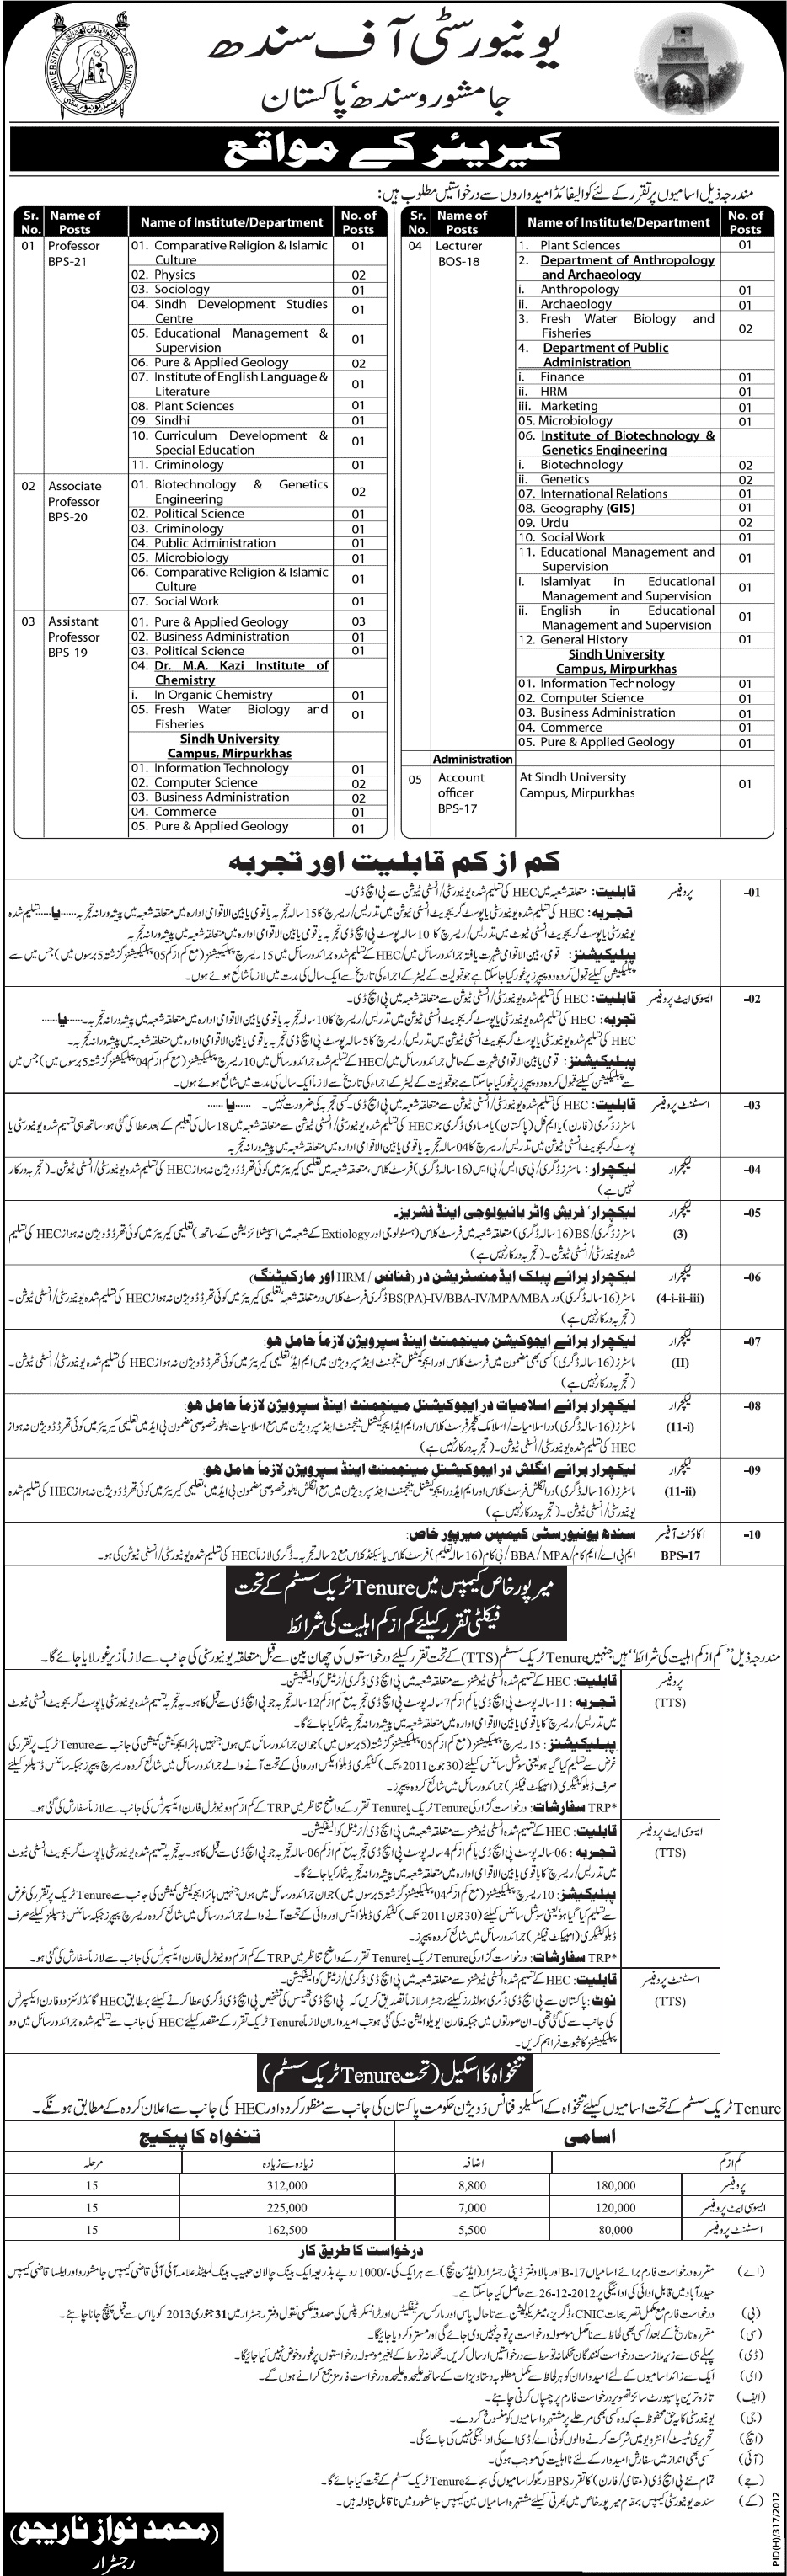 University of Sindh Jobs 2012 for Faculty Associate / Assistant / Professors / Lecturers